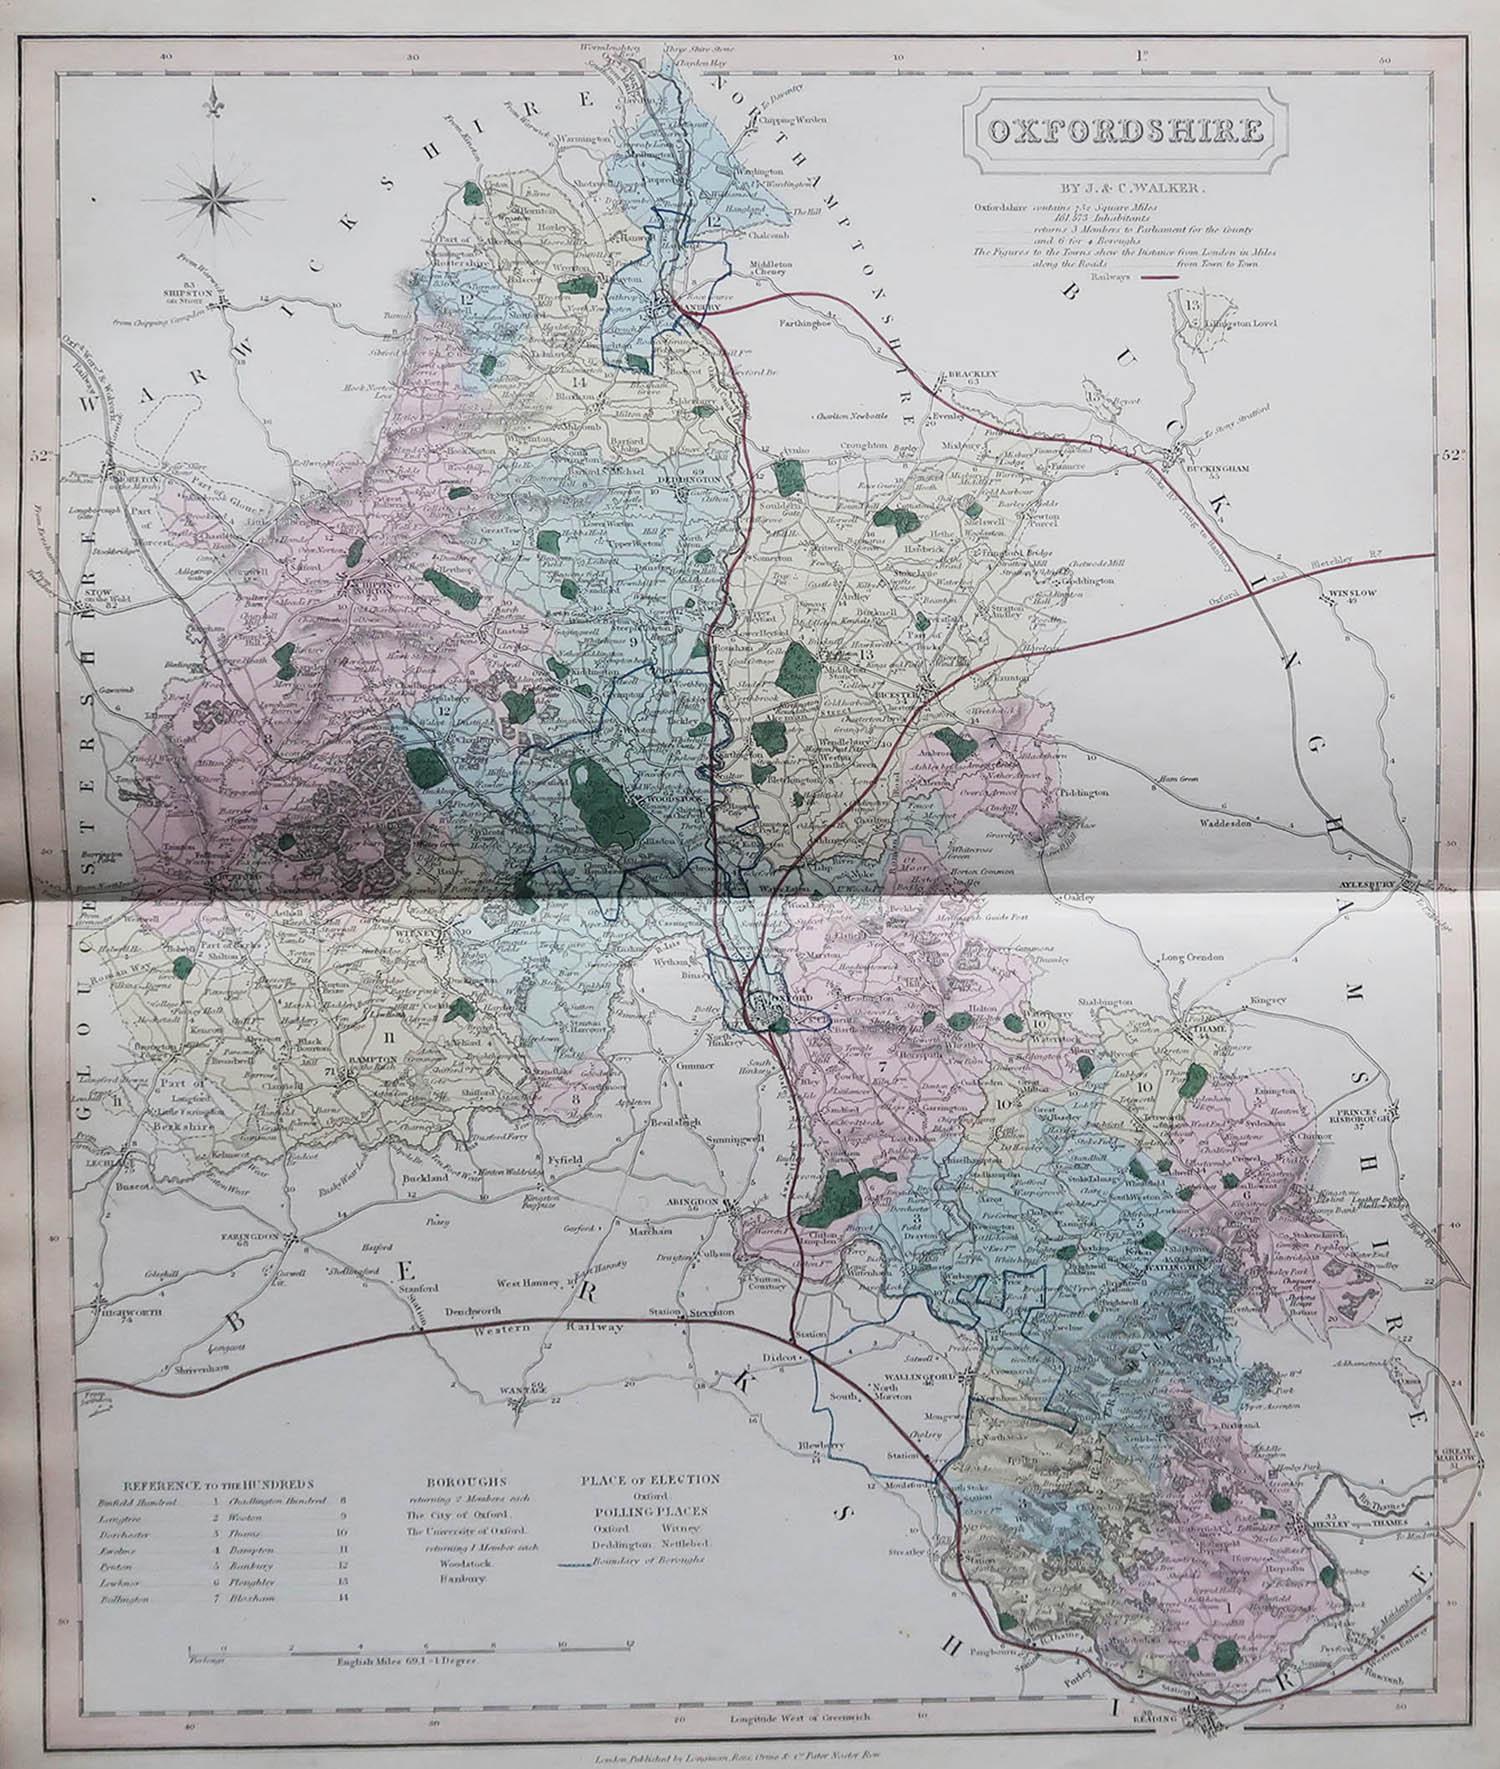 Great map of Oxfordshire

Original colour

By J & C Walker

Published by Longman, Rees, Orme, Brown & Co. 1851

Unframed.




